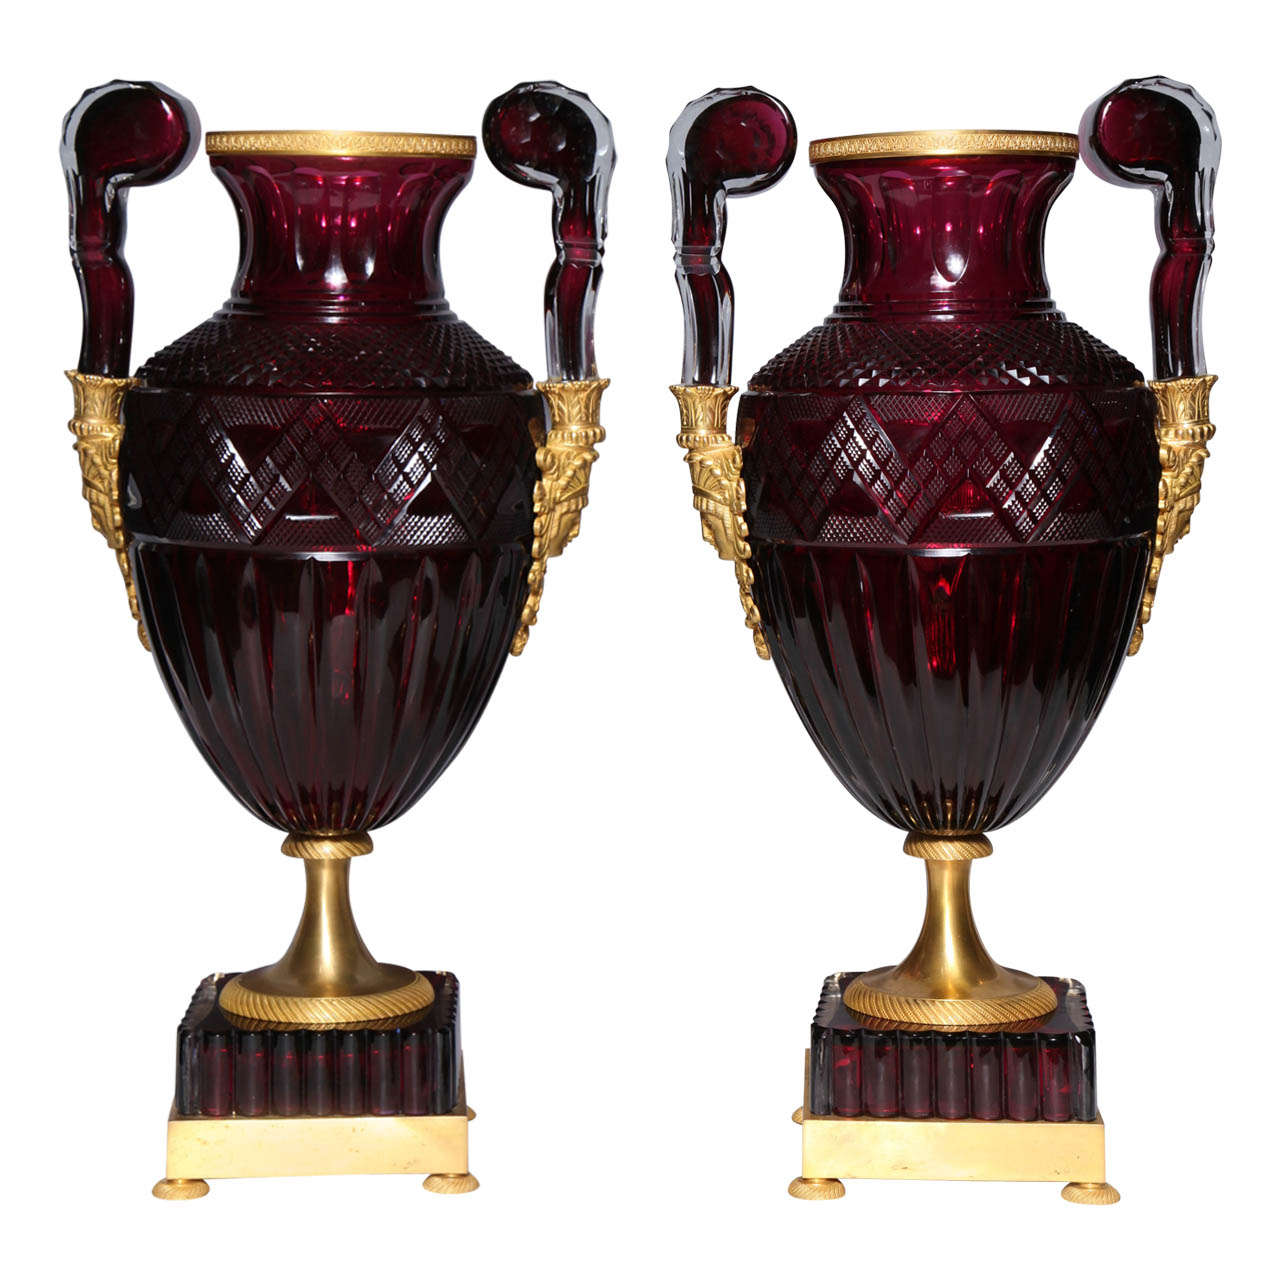 Magnificent Pair of Russian Imperial Ruby Glass Vases w/ Gilded Bronze Mounts